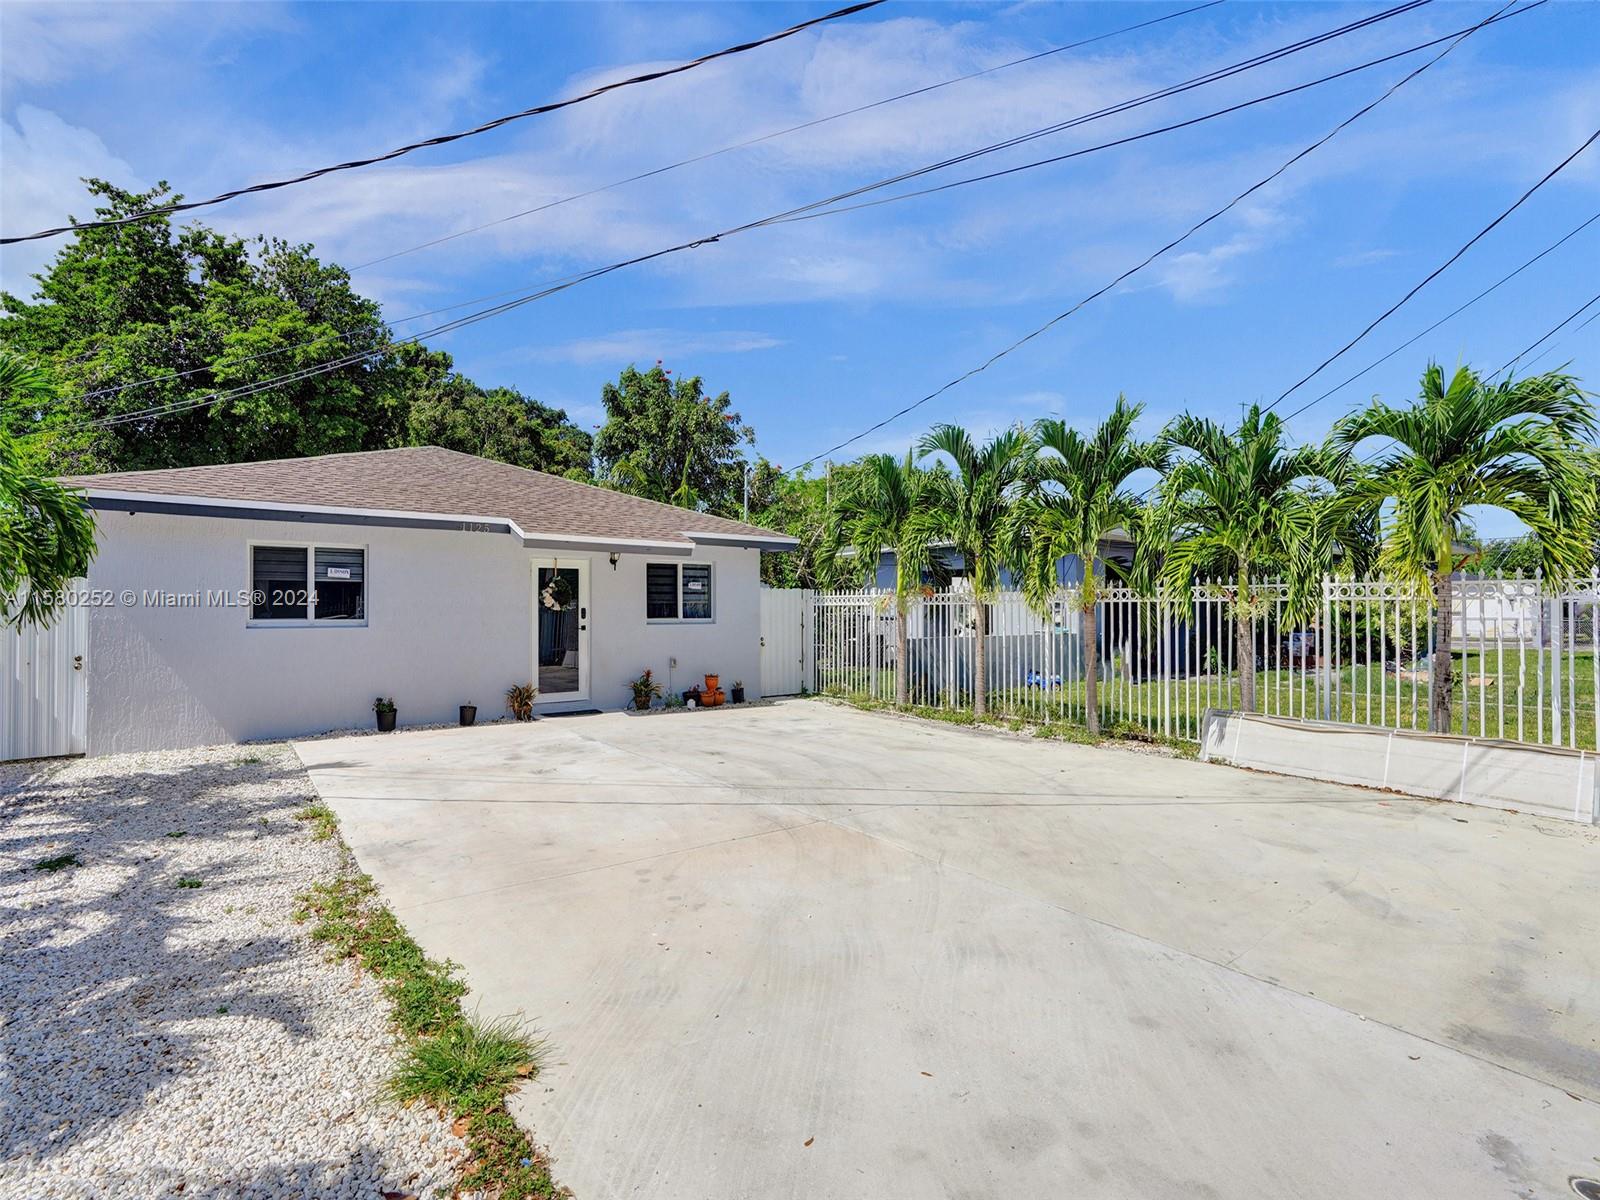 1125 Nw 58th St St, Miami, Broward County, Florida - 4 Bedrooms  
2 Bathrooms - 